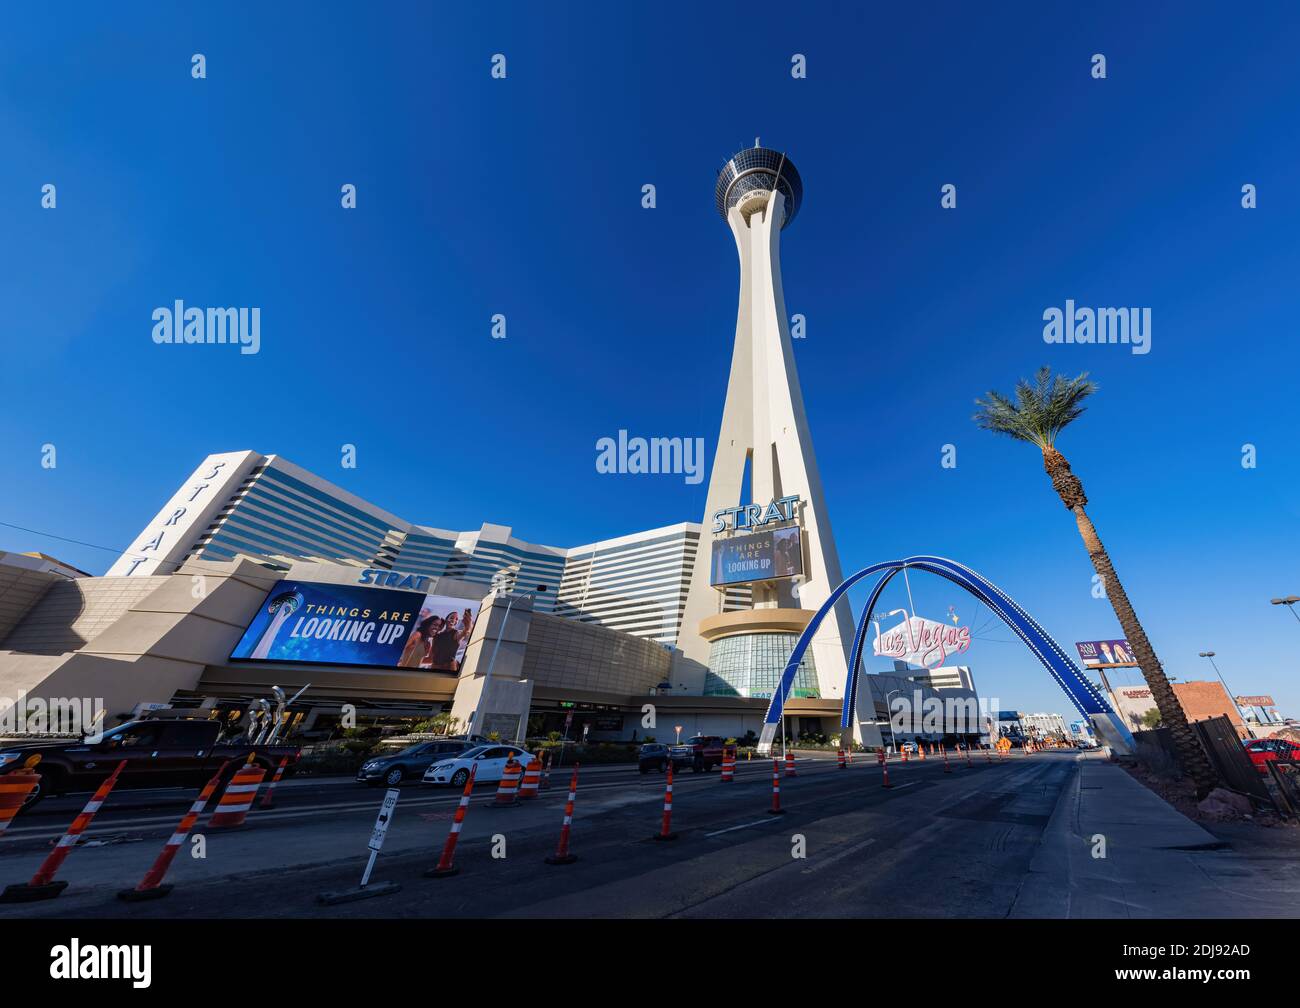 The Strat Hotel Casino And Skypod And Las Vegas Boulevard Gateway Arches At  Night Stock Photo - Download Image Now - iStock